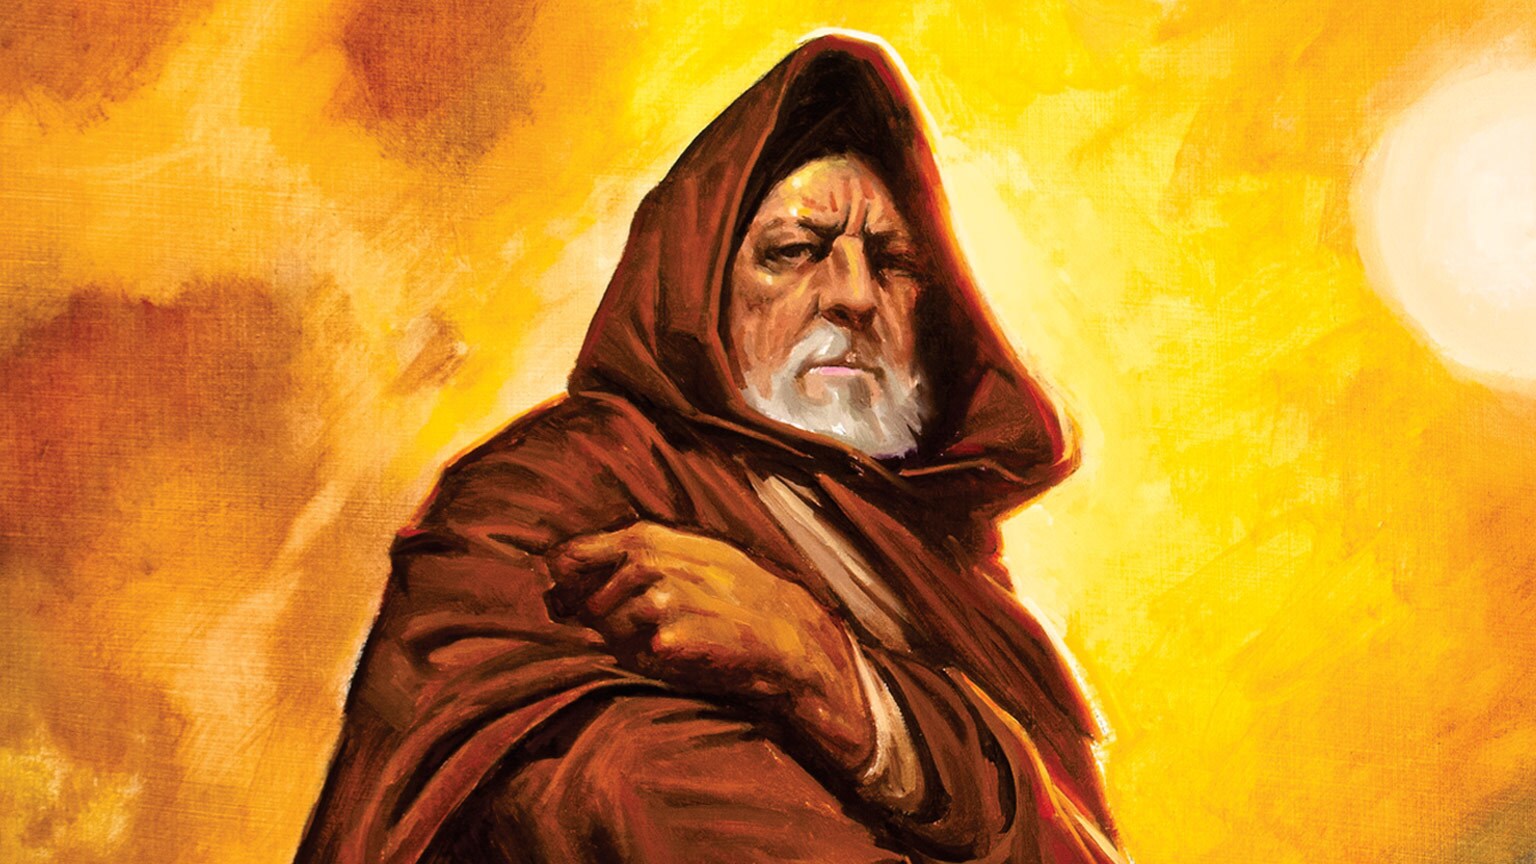 Hello There! Marvel’s Obi-Wan Comic Coming in May - Exclusive